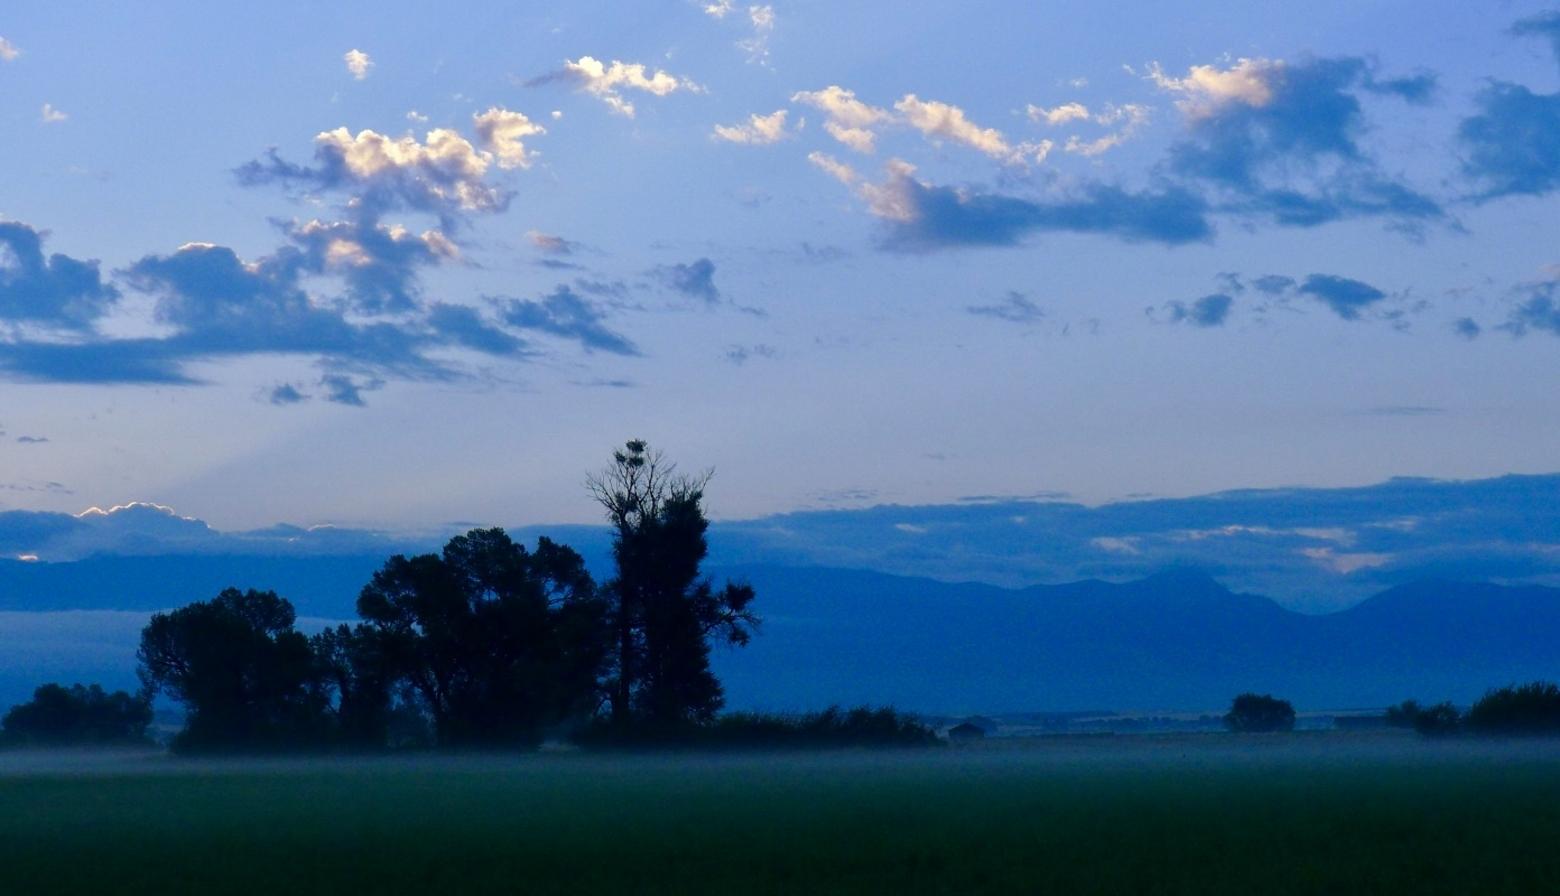 The Gallatin Valley, looking toward the Bridger Mountains, bathed in soothing twilight. "We all love this place so much it hurts when we witness changes that seem beyond our control," said the late businessperson, farmer and philanthropist Tim Crawford who took this photograph. "But you know what, there's a lot we can do. The first is to become informed and the second is to use our knowledge to take action and try to make things better." Photo by Tim Crawford